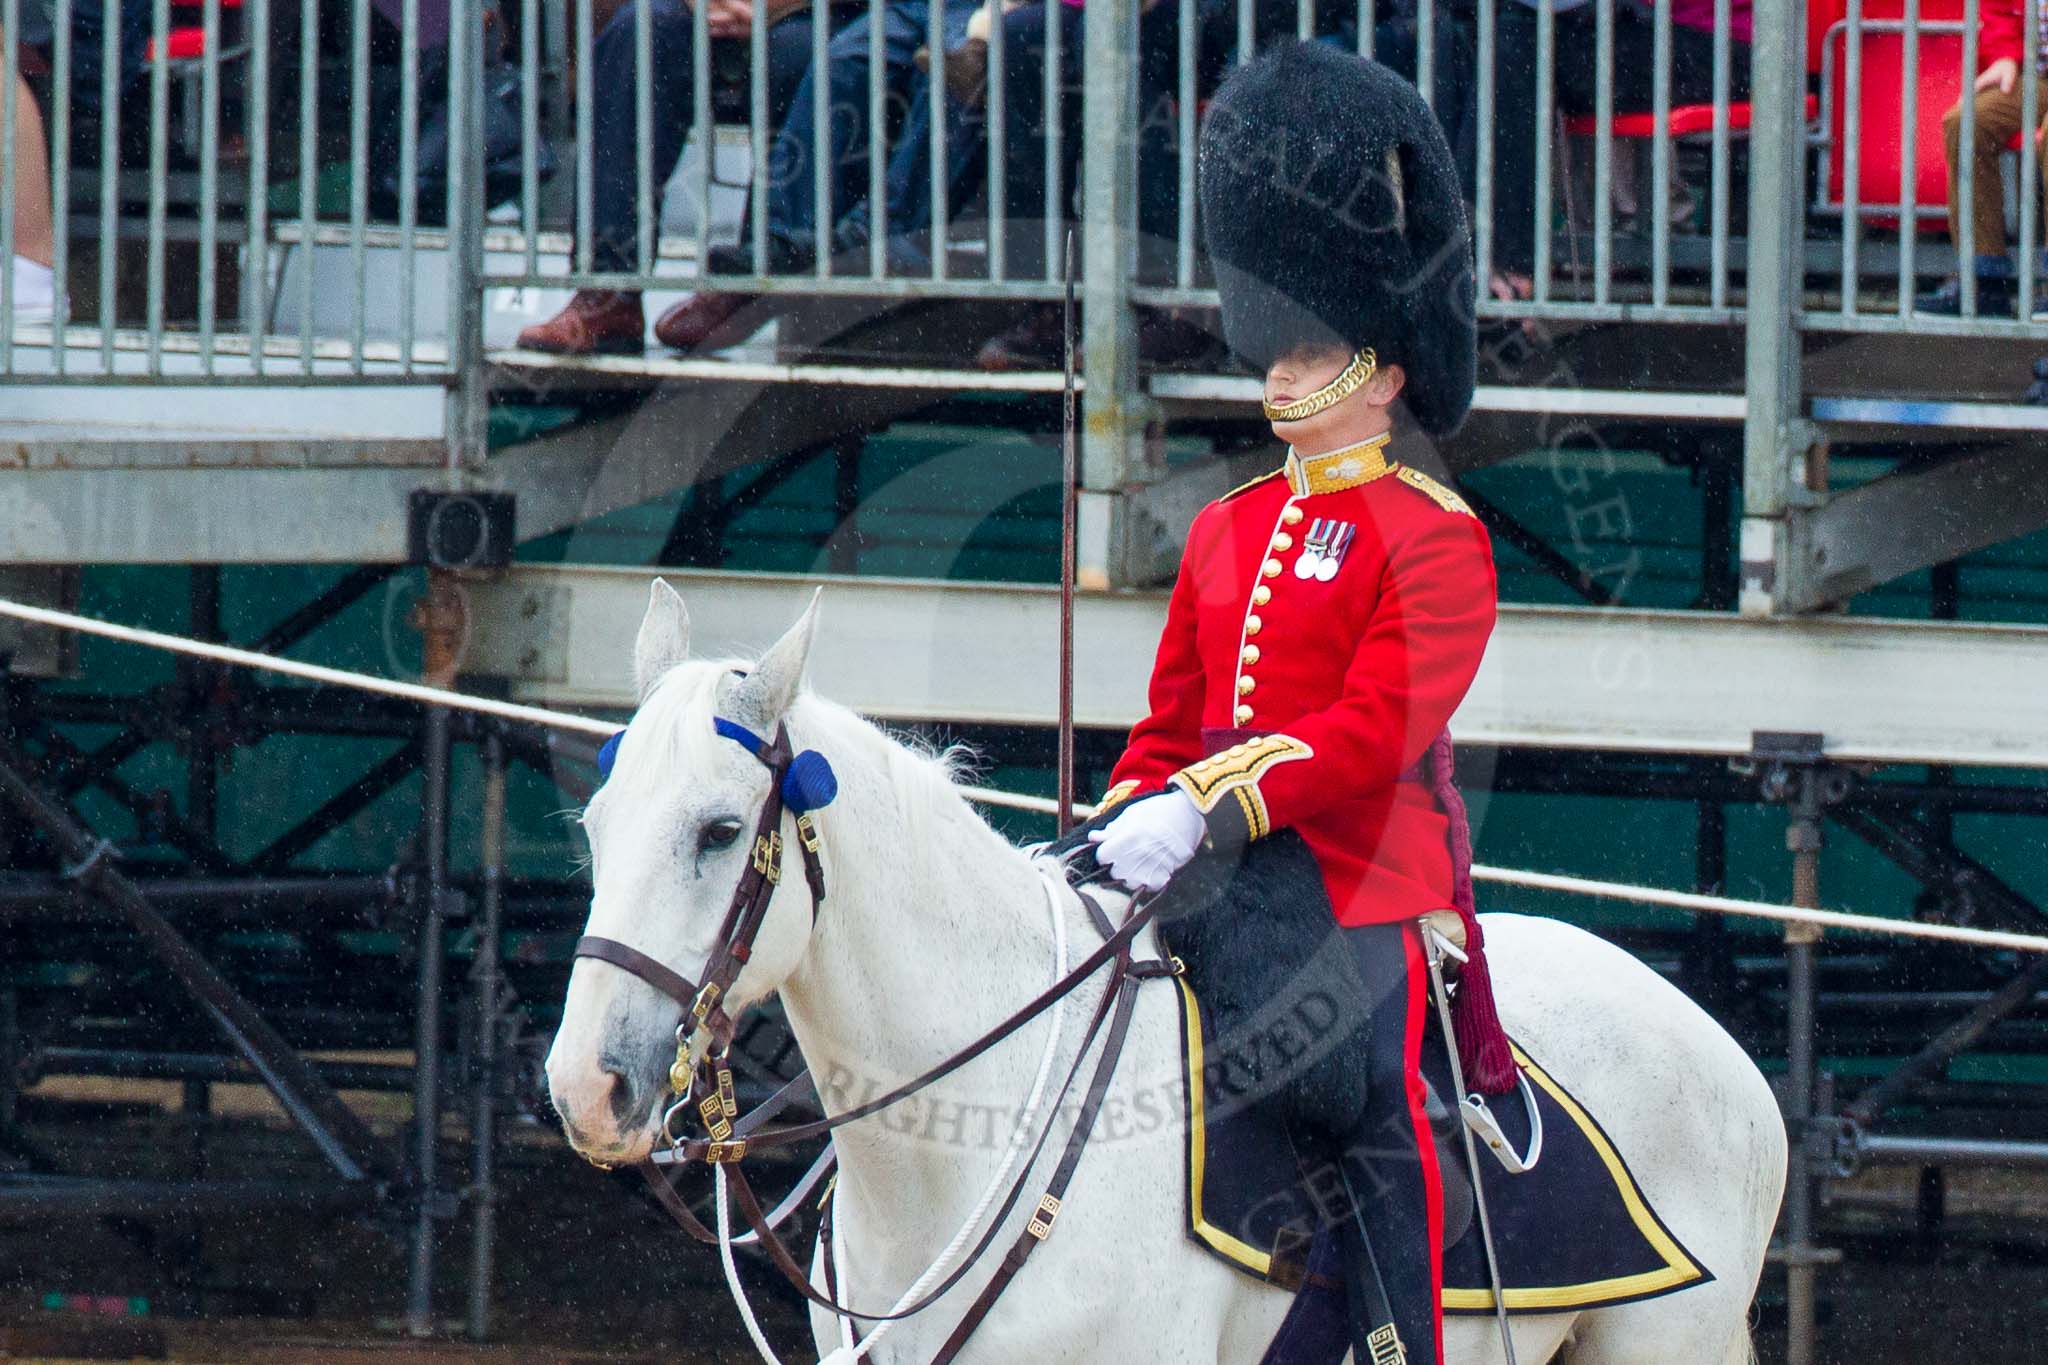 The Colonel's Review 2014.
Horse Guards Parade, Westminster,
London,

United Kingdom,
on 07 June 2014 at 11:22, image #416